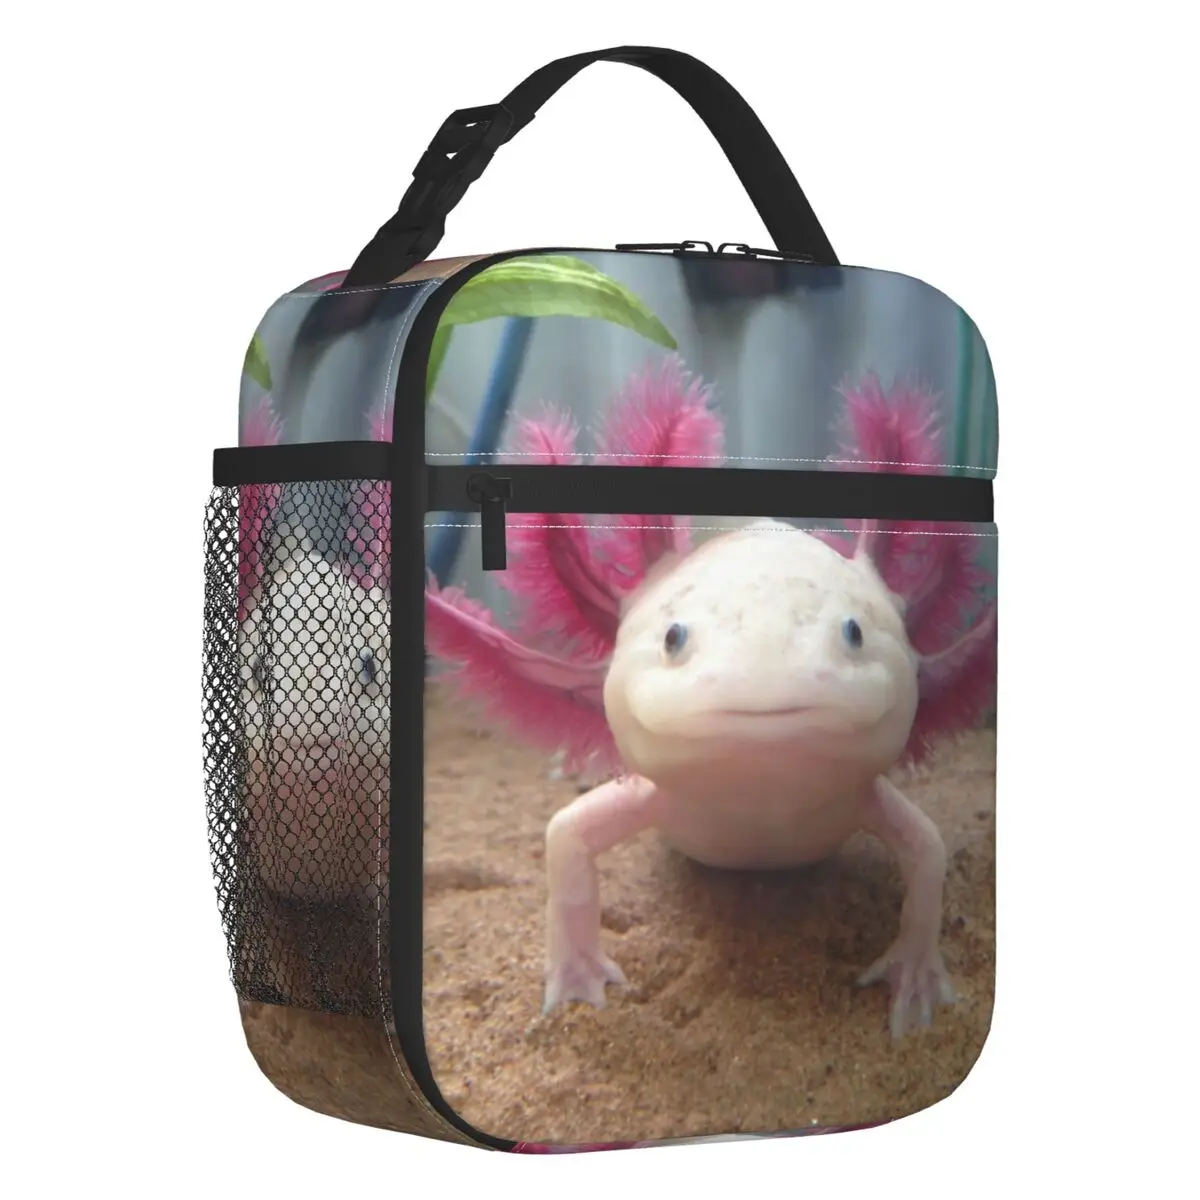 

Smiling Leucistic Axolotl Insulated Lunch Bag for School Office Salamander Animal Waterproof Cooler Thermal Lunch Box Women Kids